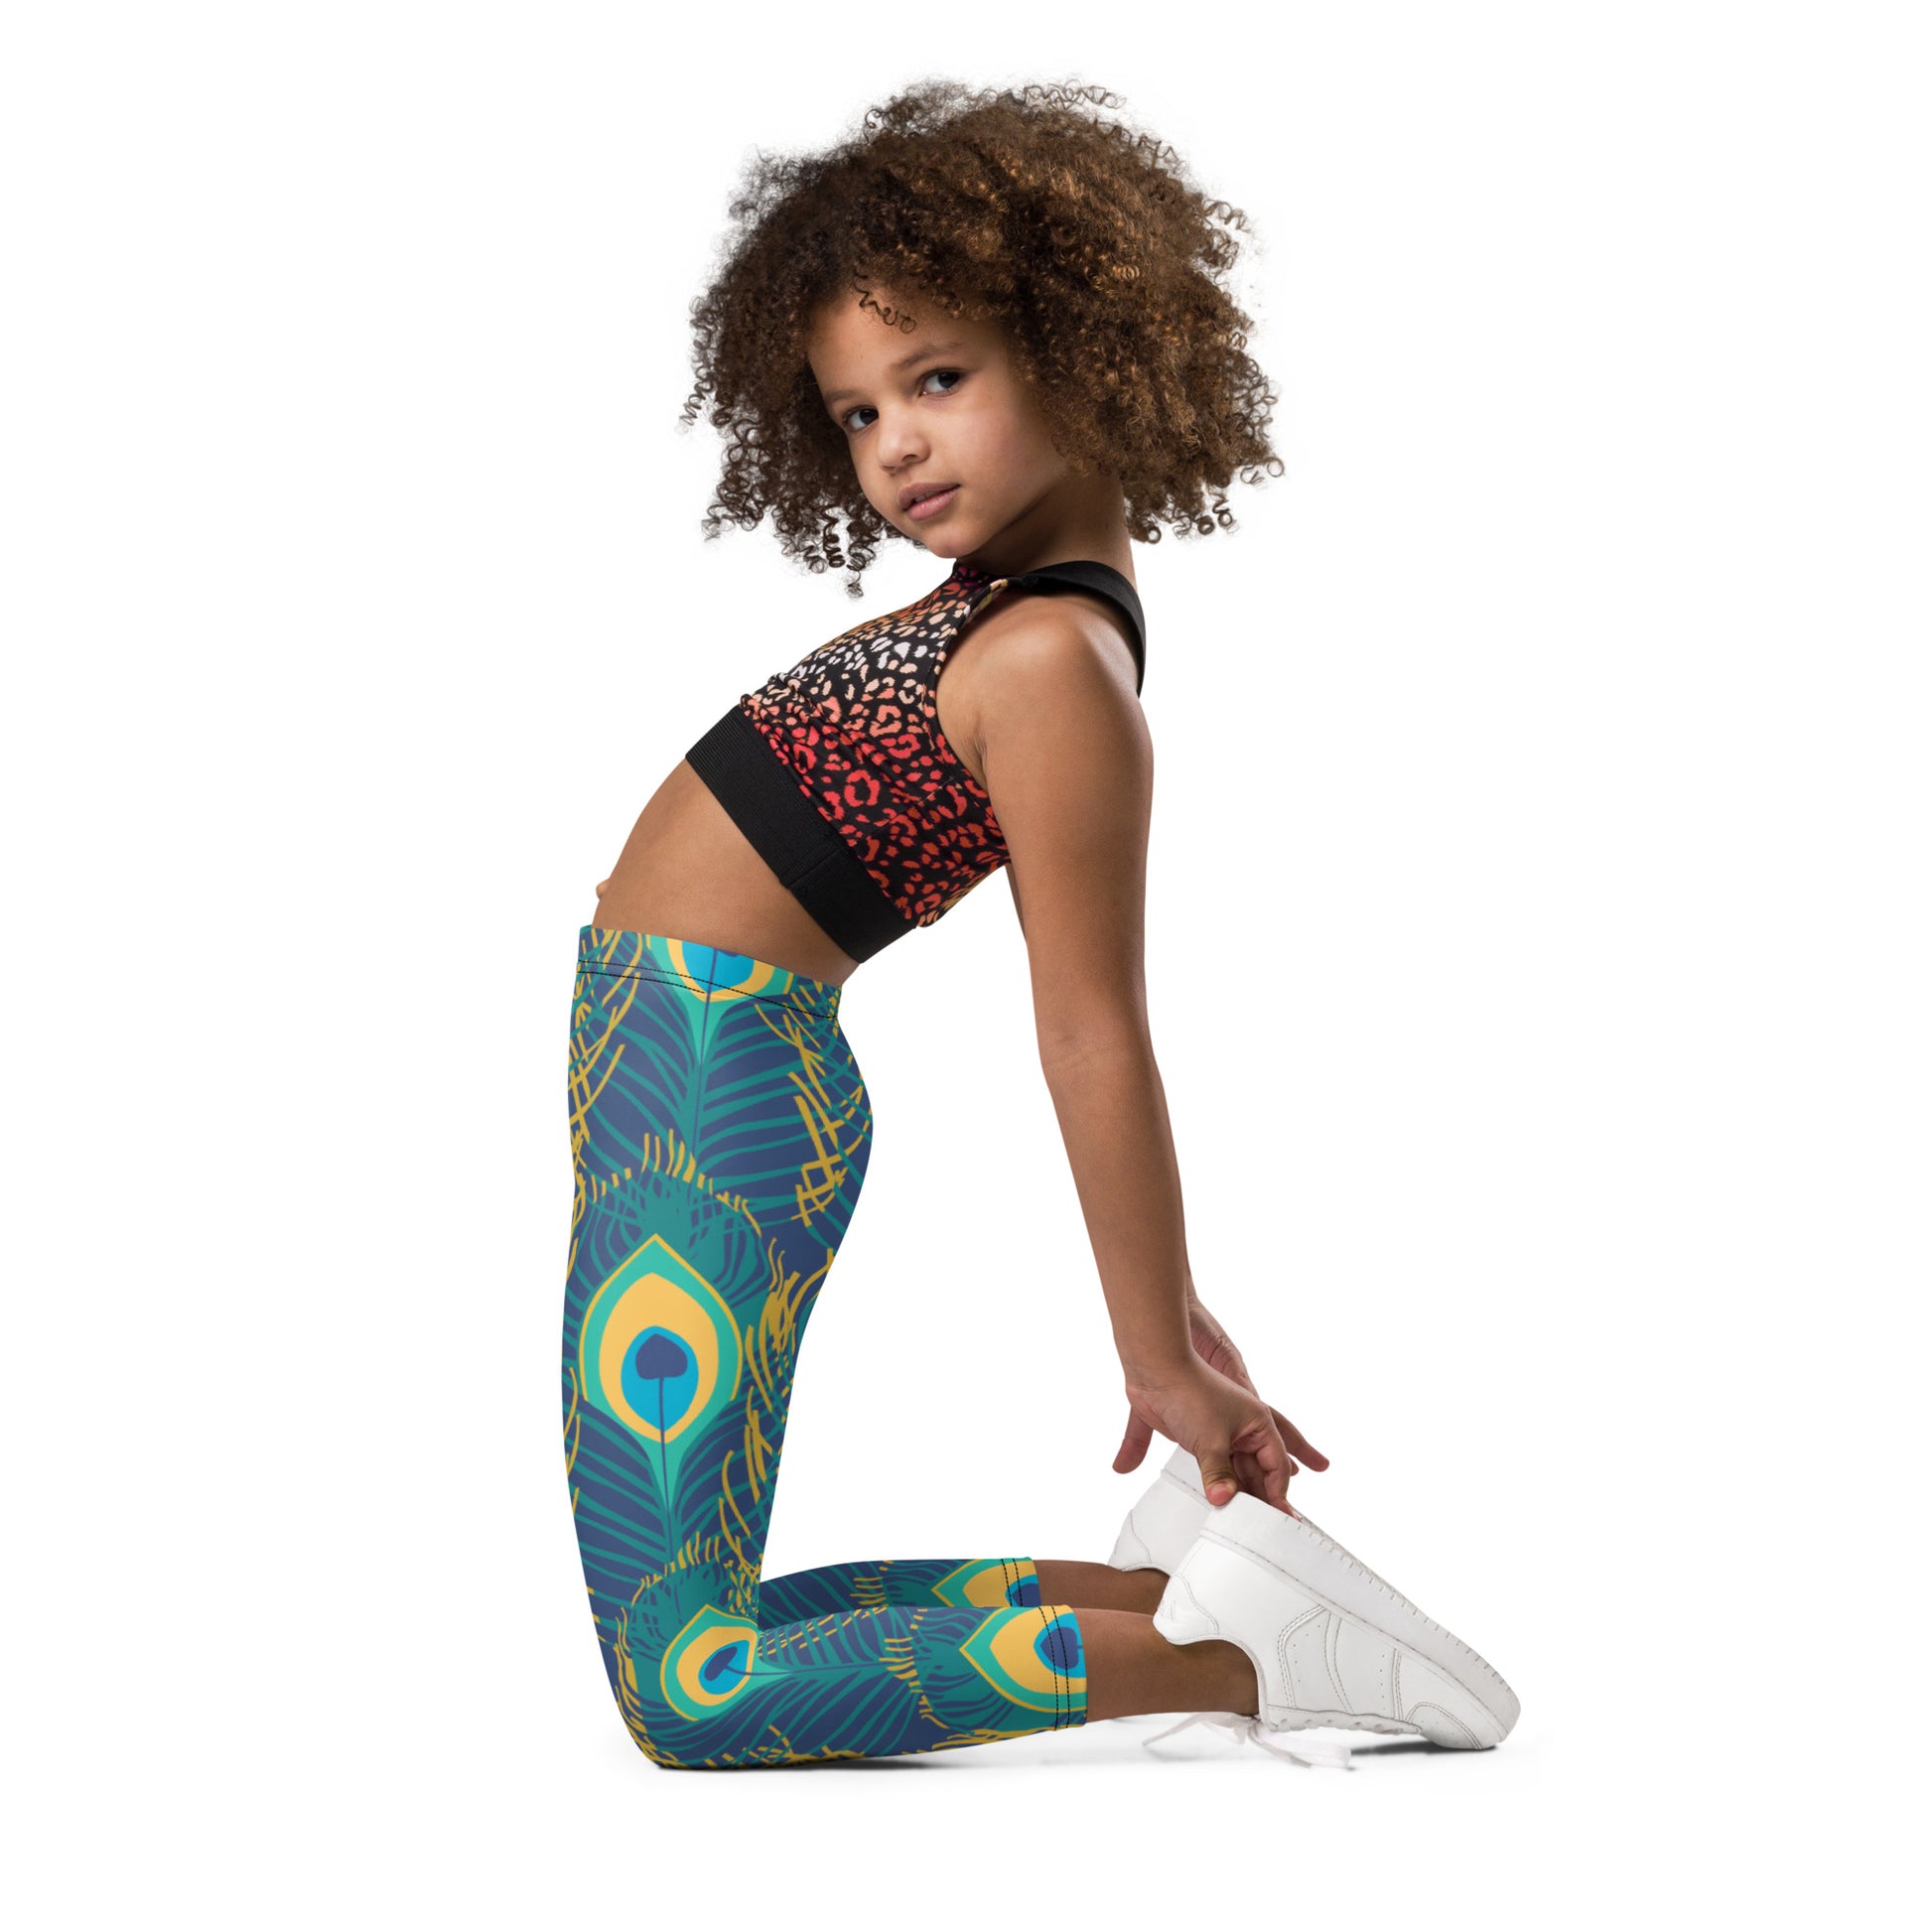 Green Peacock feathers Kid's Leggings - 2T - Sport Finesse